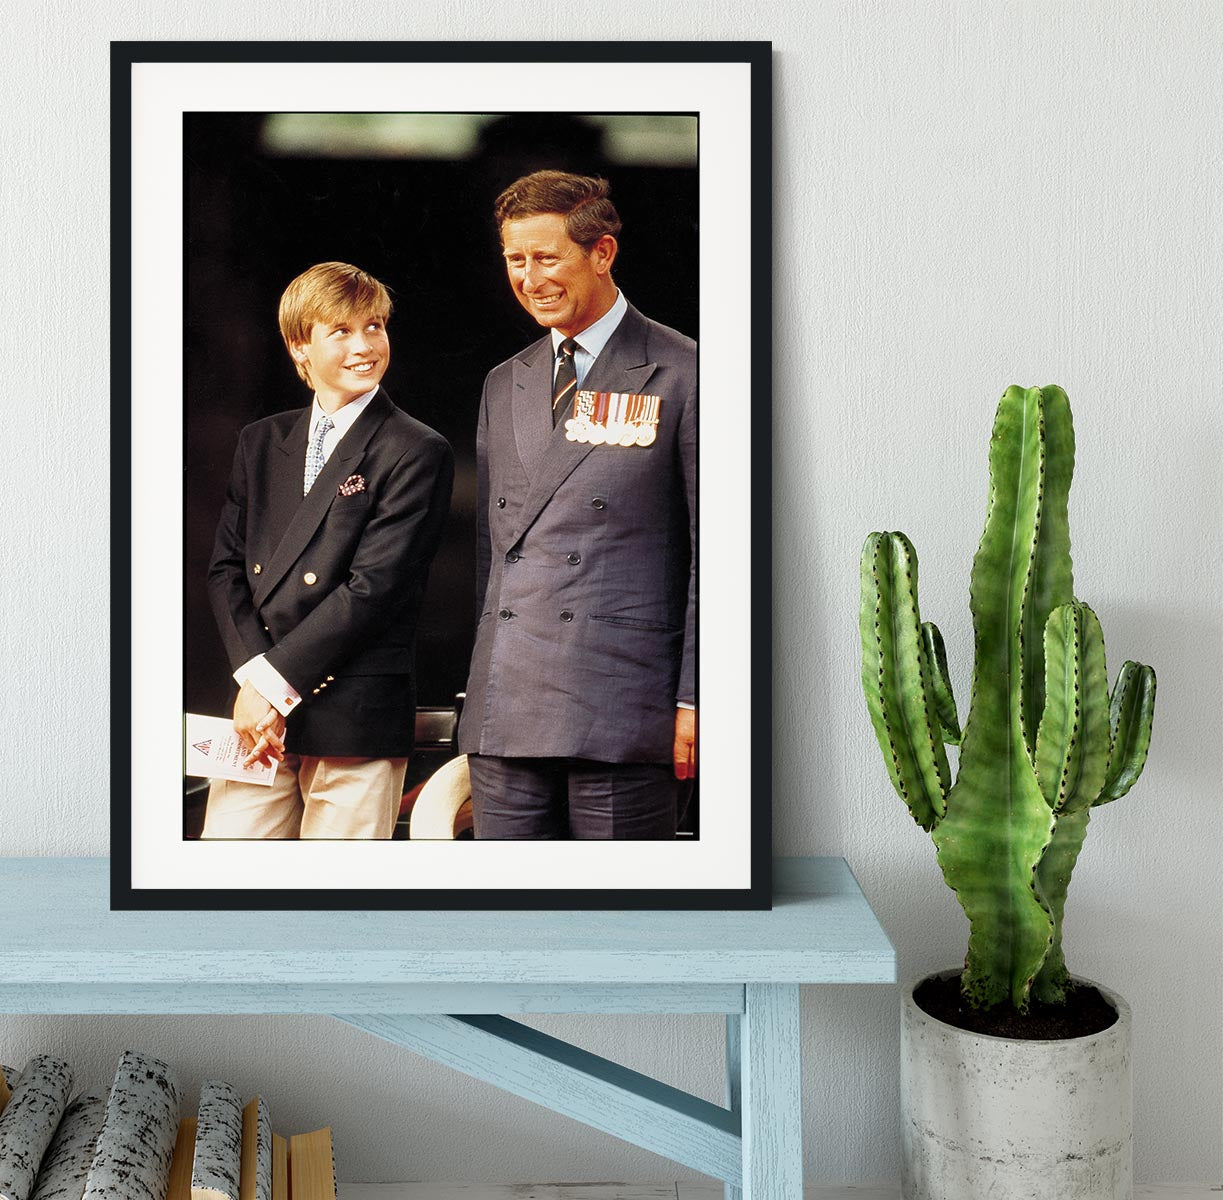 Prince William with Prince Charles at a VJ Parade Framed Print - Canvas Art Rocks - 1